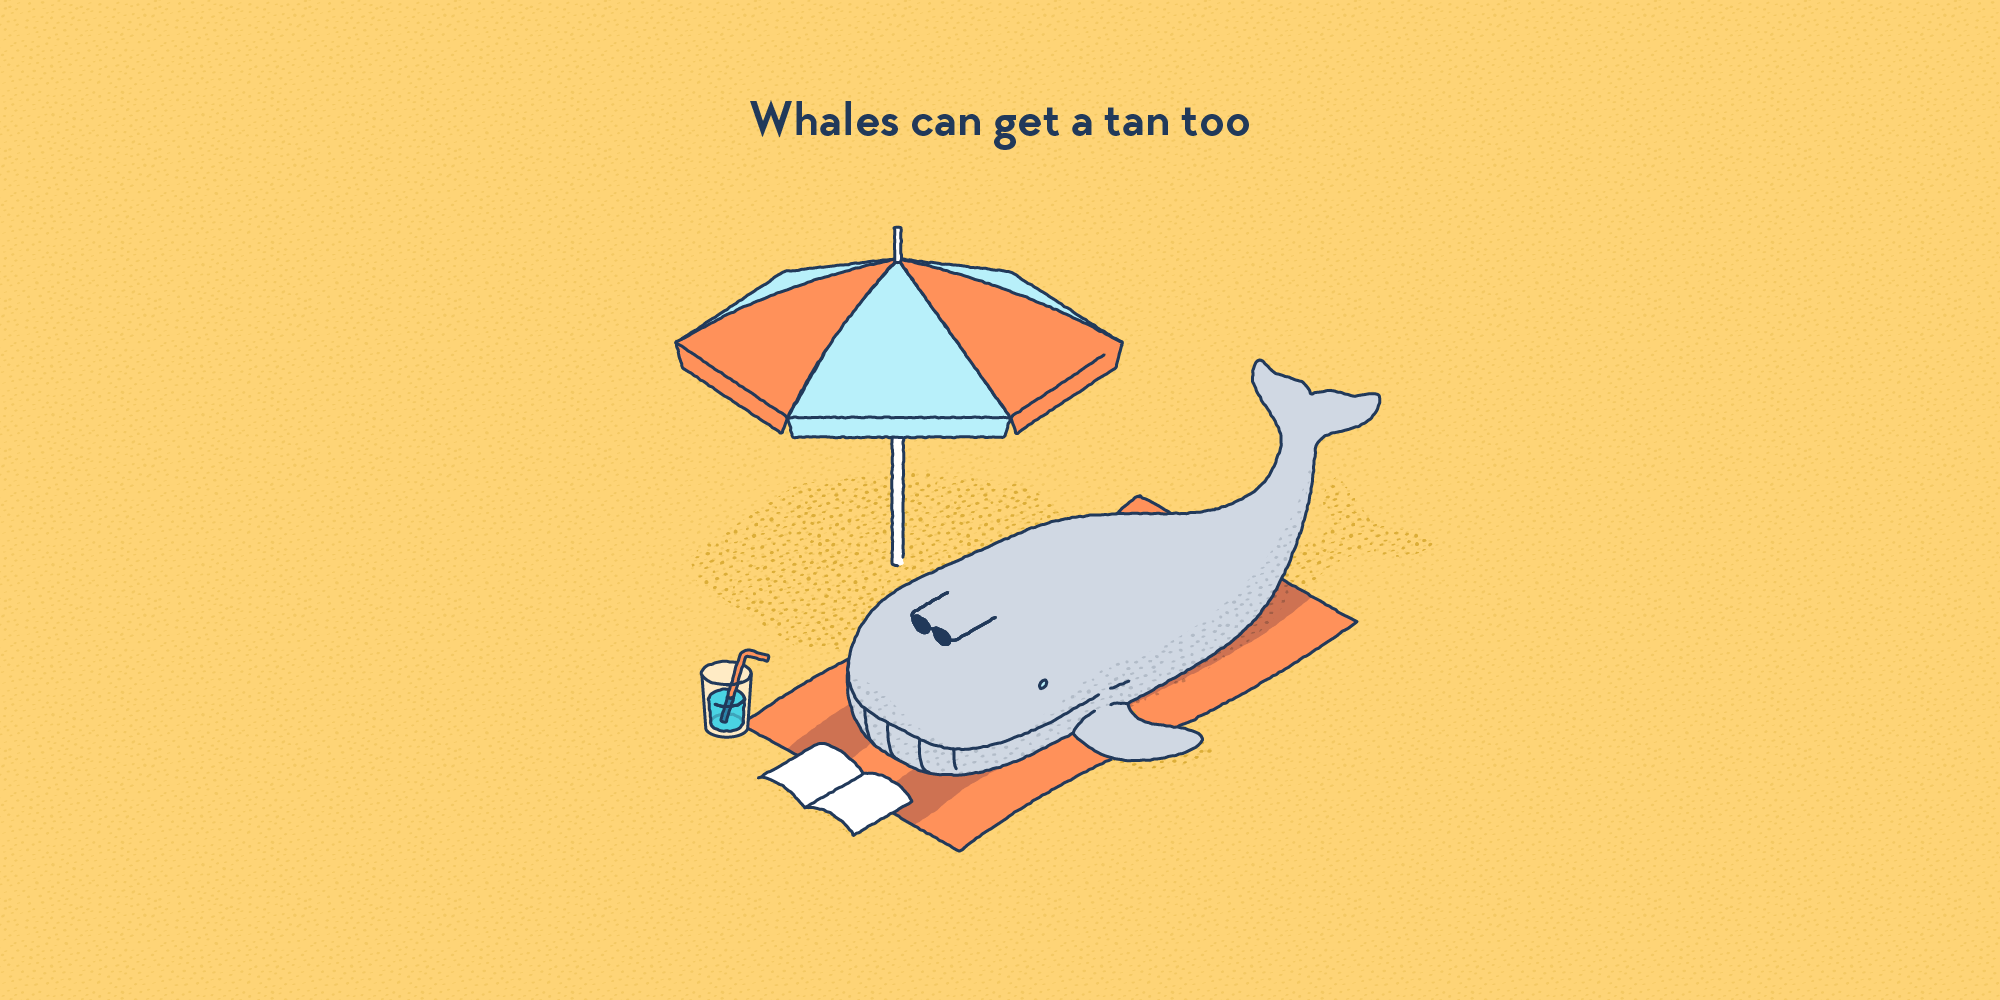 A whale on the beach, with its towel, umbrella, book, sunglasses, and fresh drink.